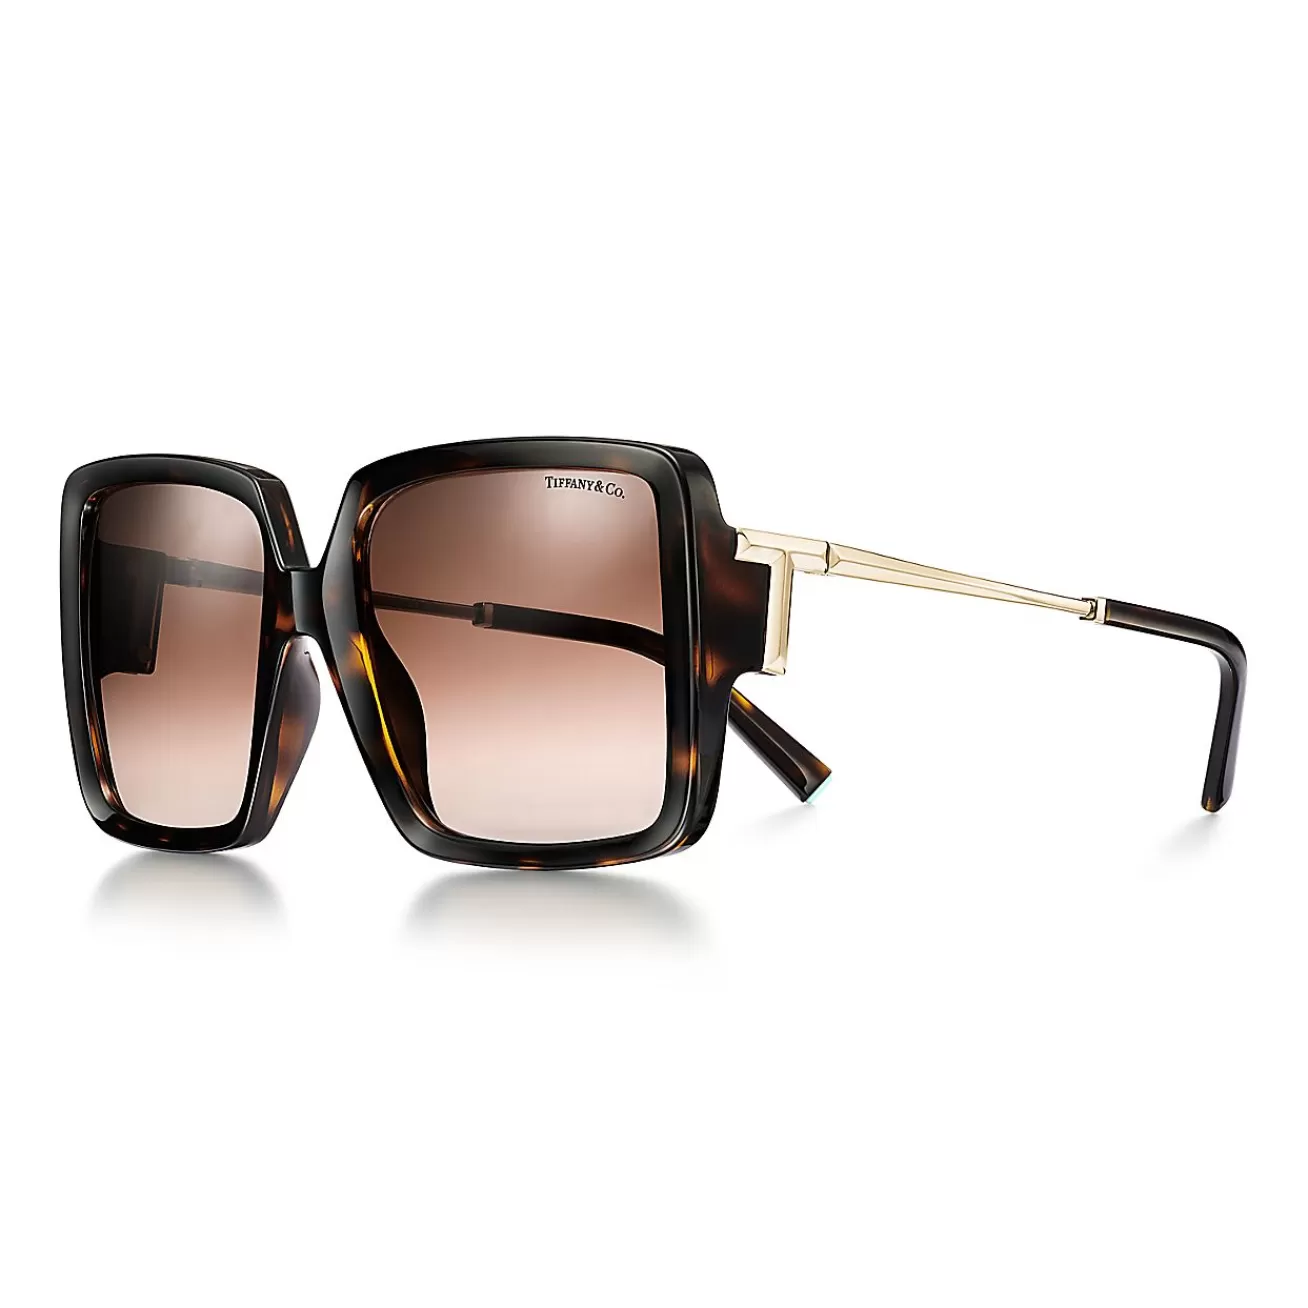 Tiffany & Co. Tiffany T Sunglasses in Tortoise Acetate with Brown Gradient Lenses | ^Women Tiffany T | Sunglasses